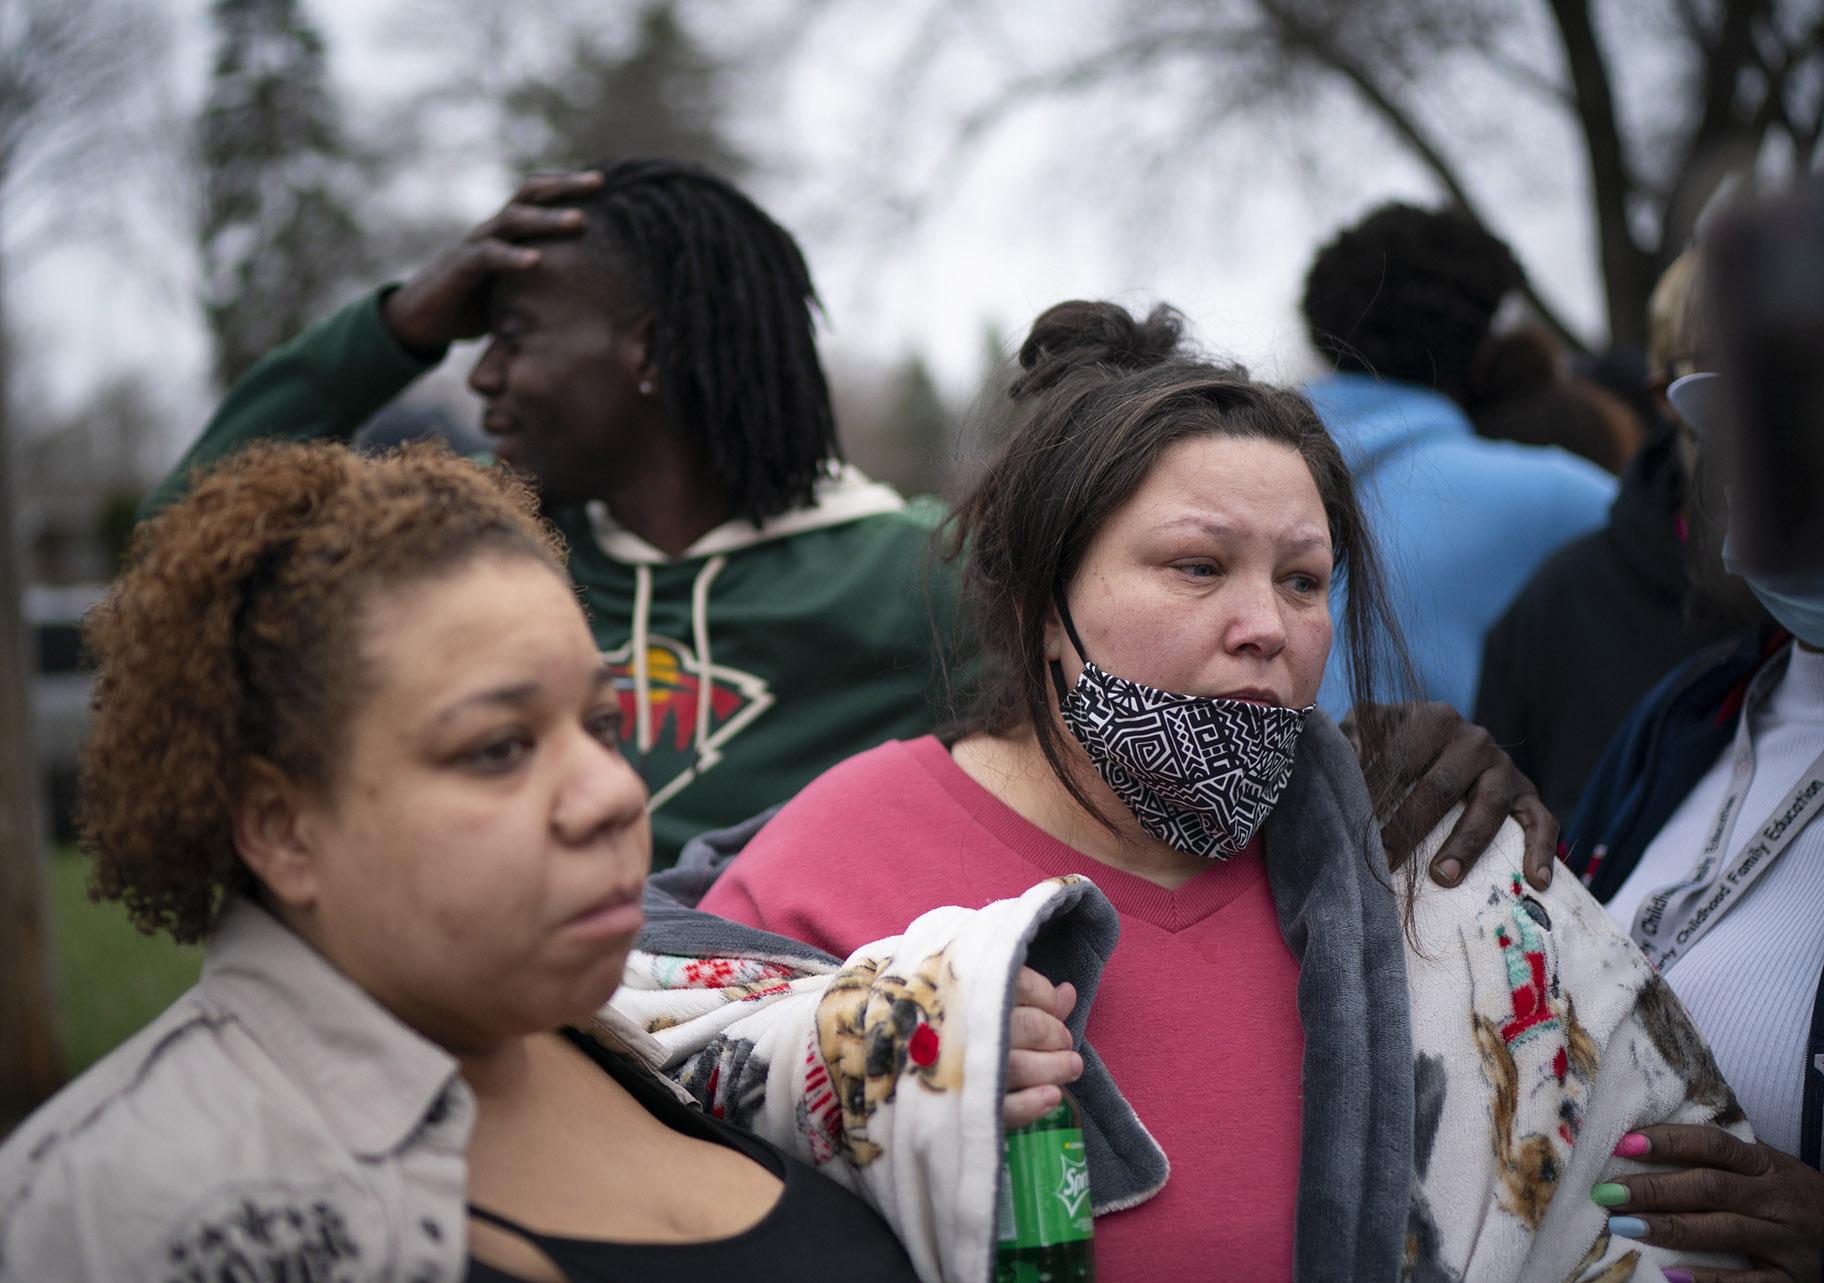 Friends and family comfort Katie Wright, right, while she speaks briefly to news media near where the family says her son Daunte Wright, 20, was shot and killed by police Sunday, April 11, 2021, in Brooklyn Center, Minn. (Jeff Wheeler / Star Tribune via AP)